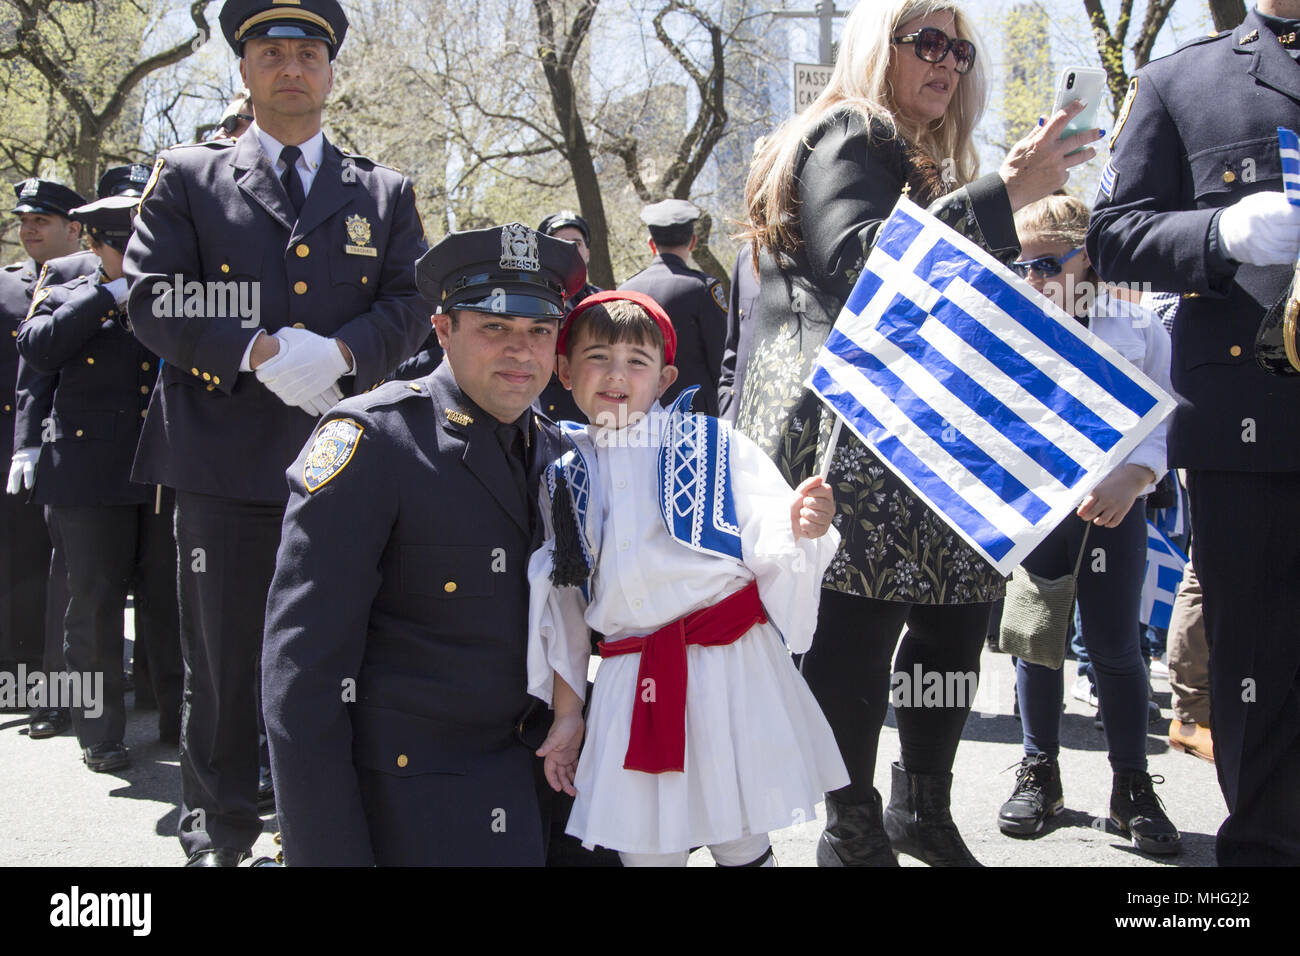 Greek Independence Day Parade in New York City. NYPD officer and son in